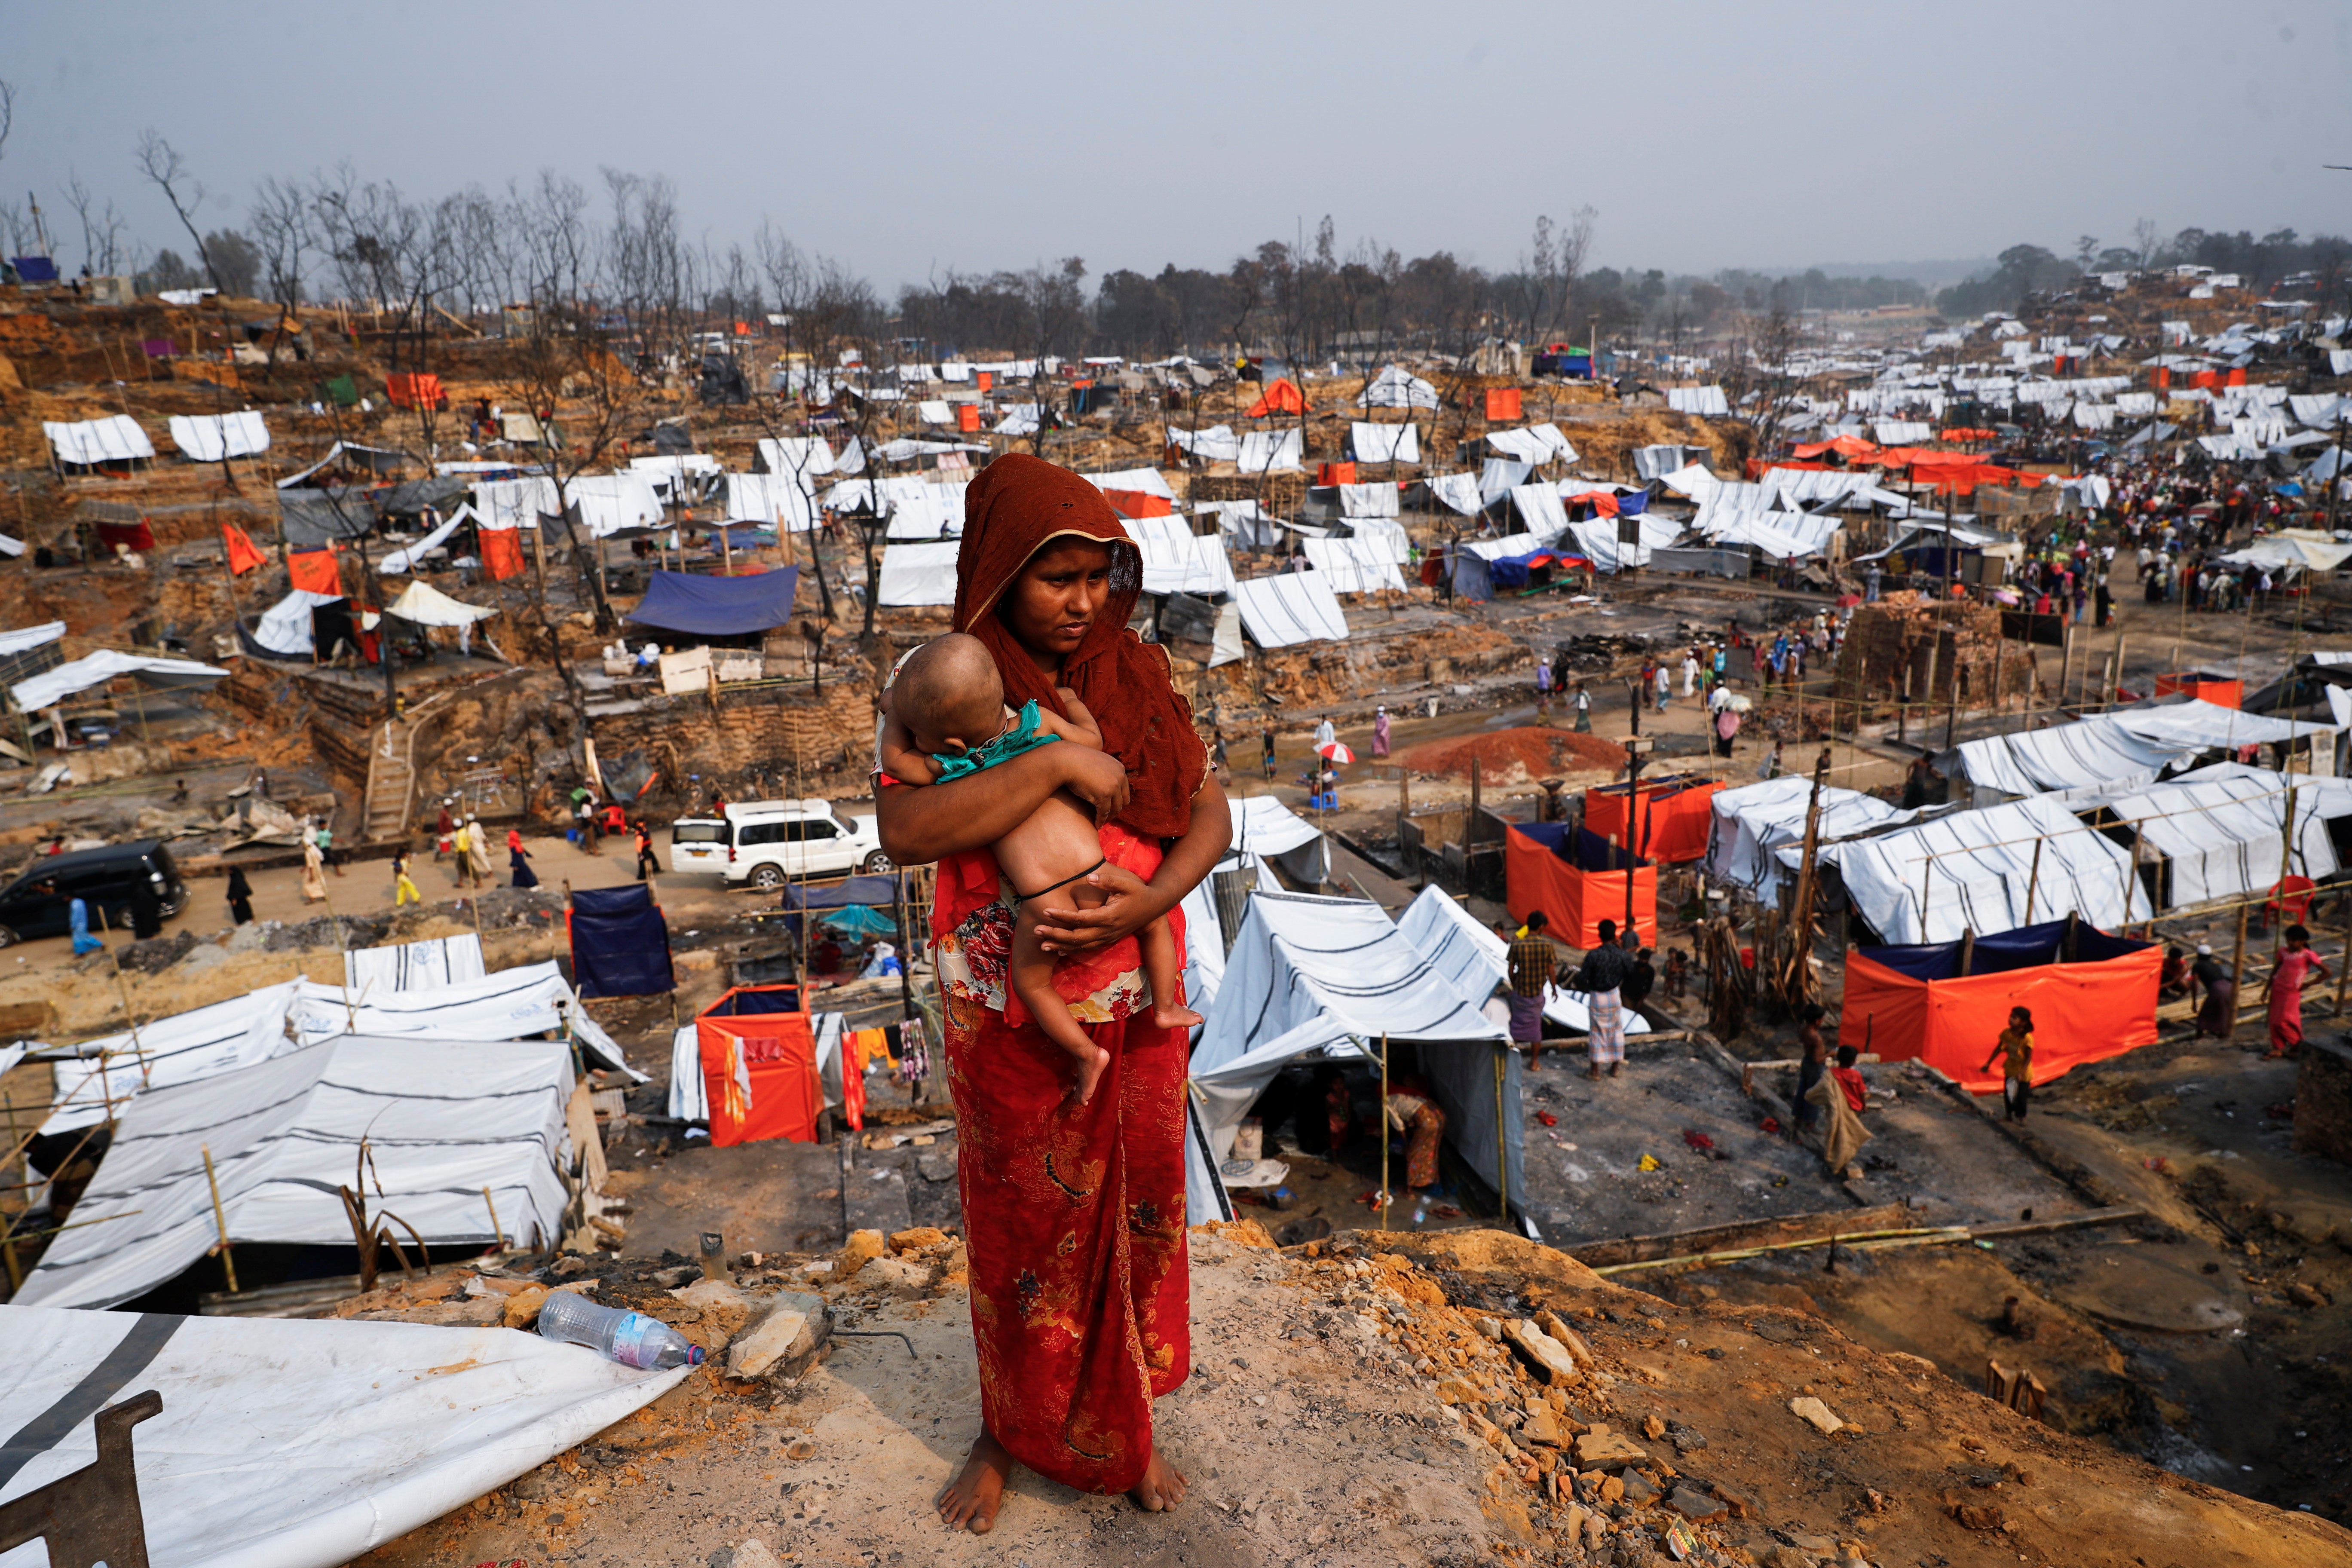 A Rohingya woman with her child at a refugee camp